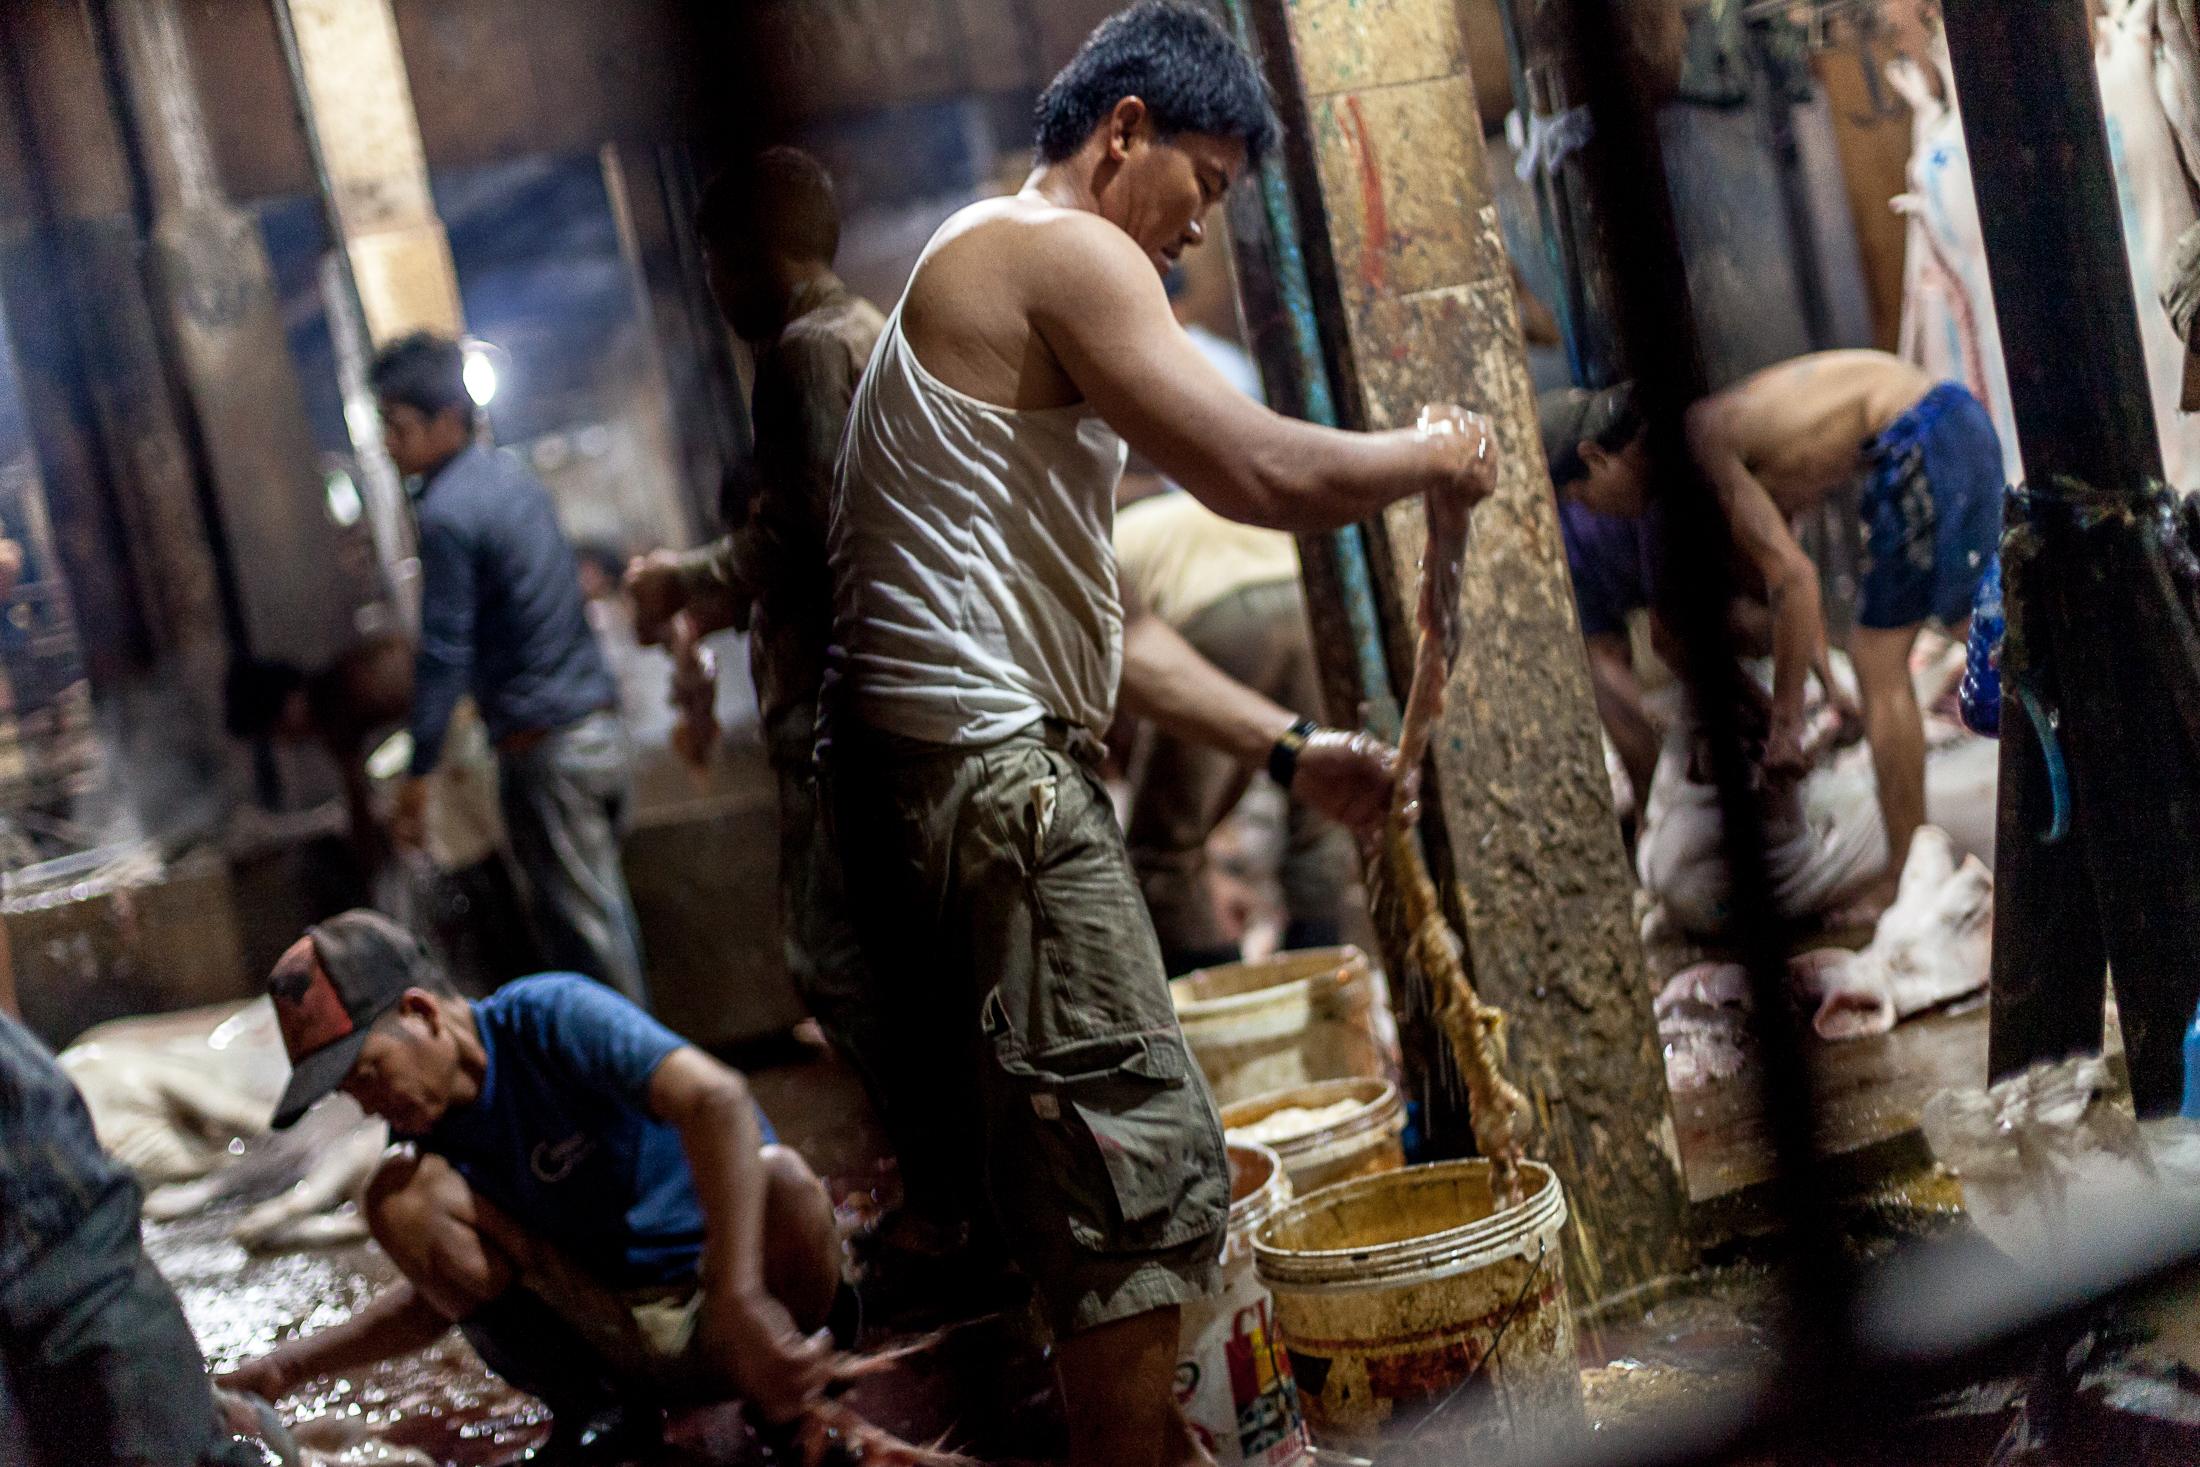 Inside a Cambodian Slaughterhouse - SIEM REAP, CAMBODIA - FEBRUARY 22: A worker cleans...